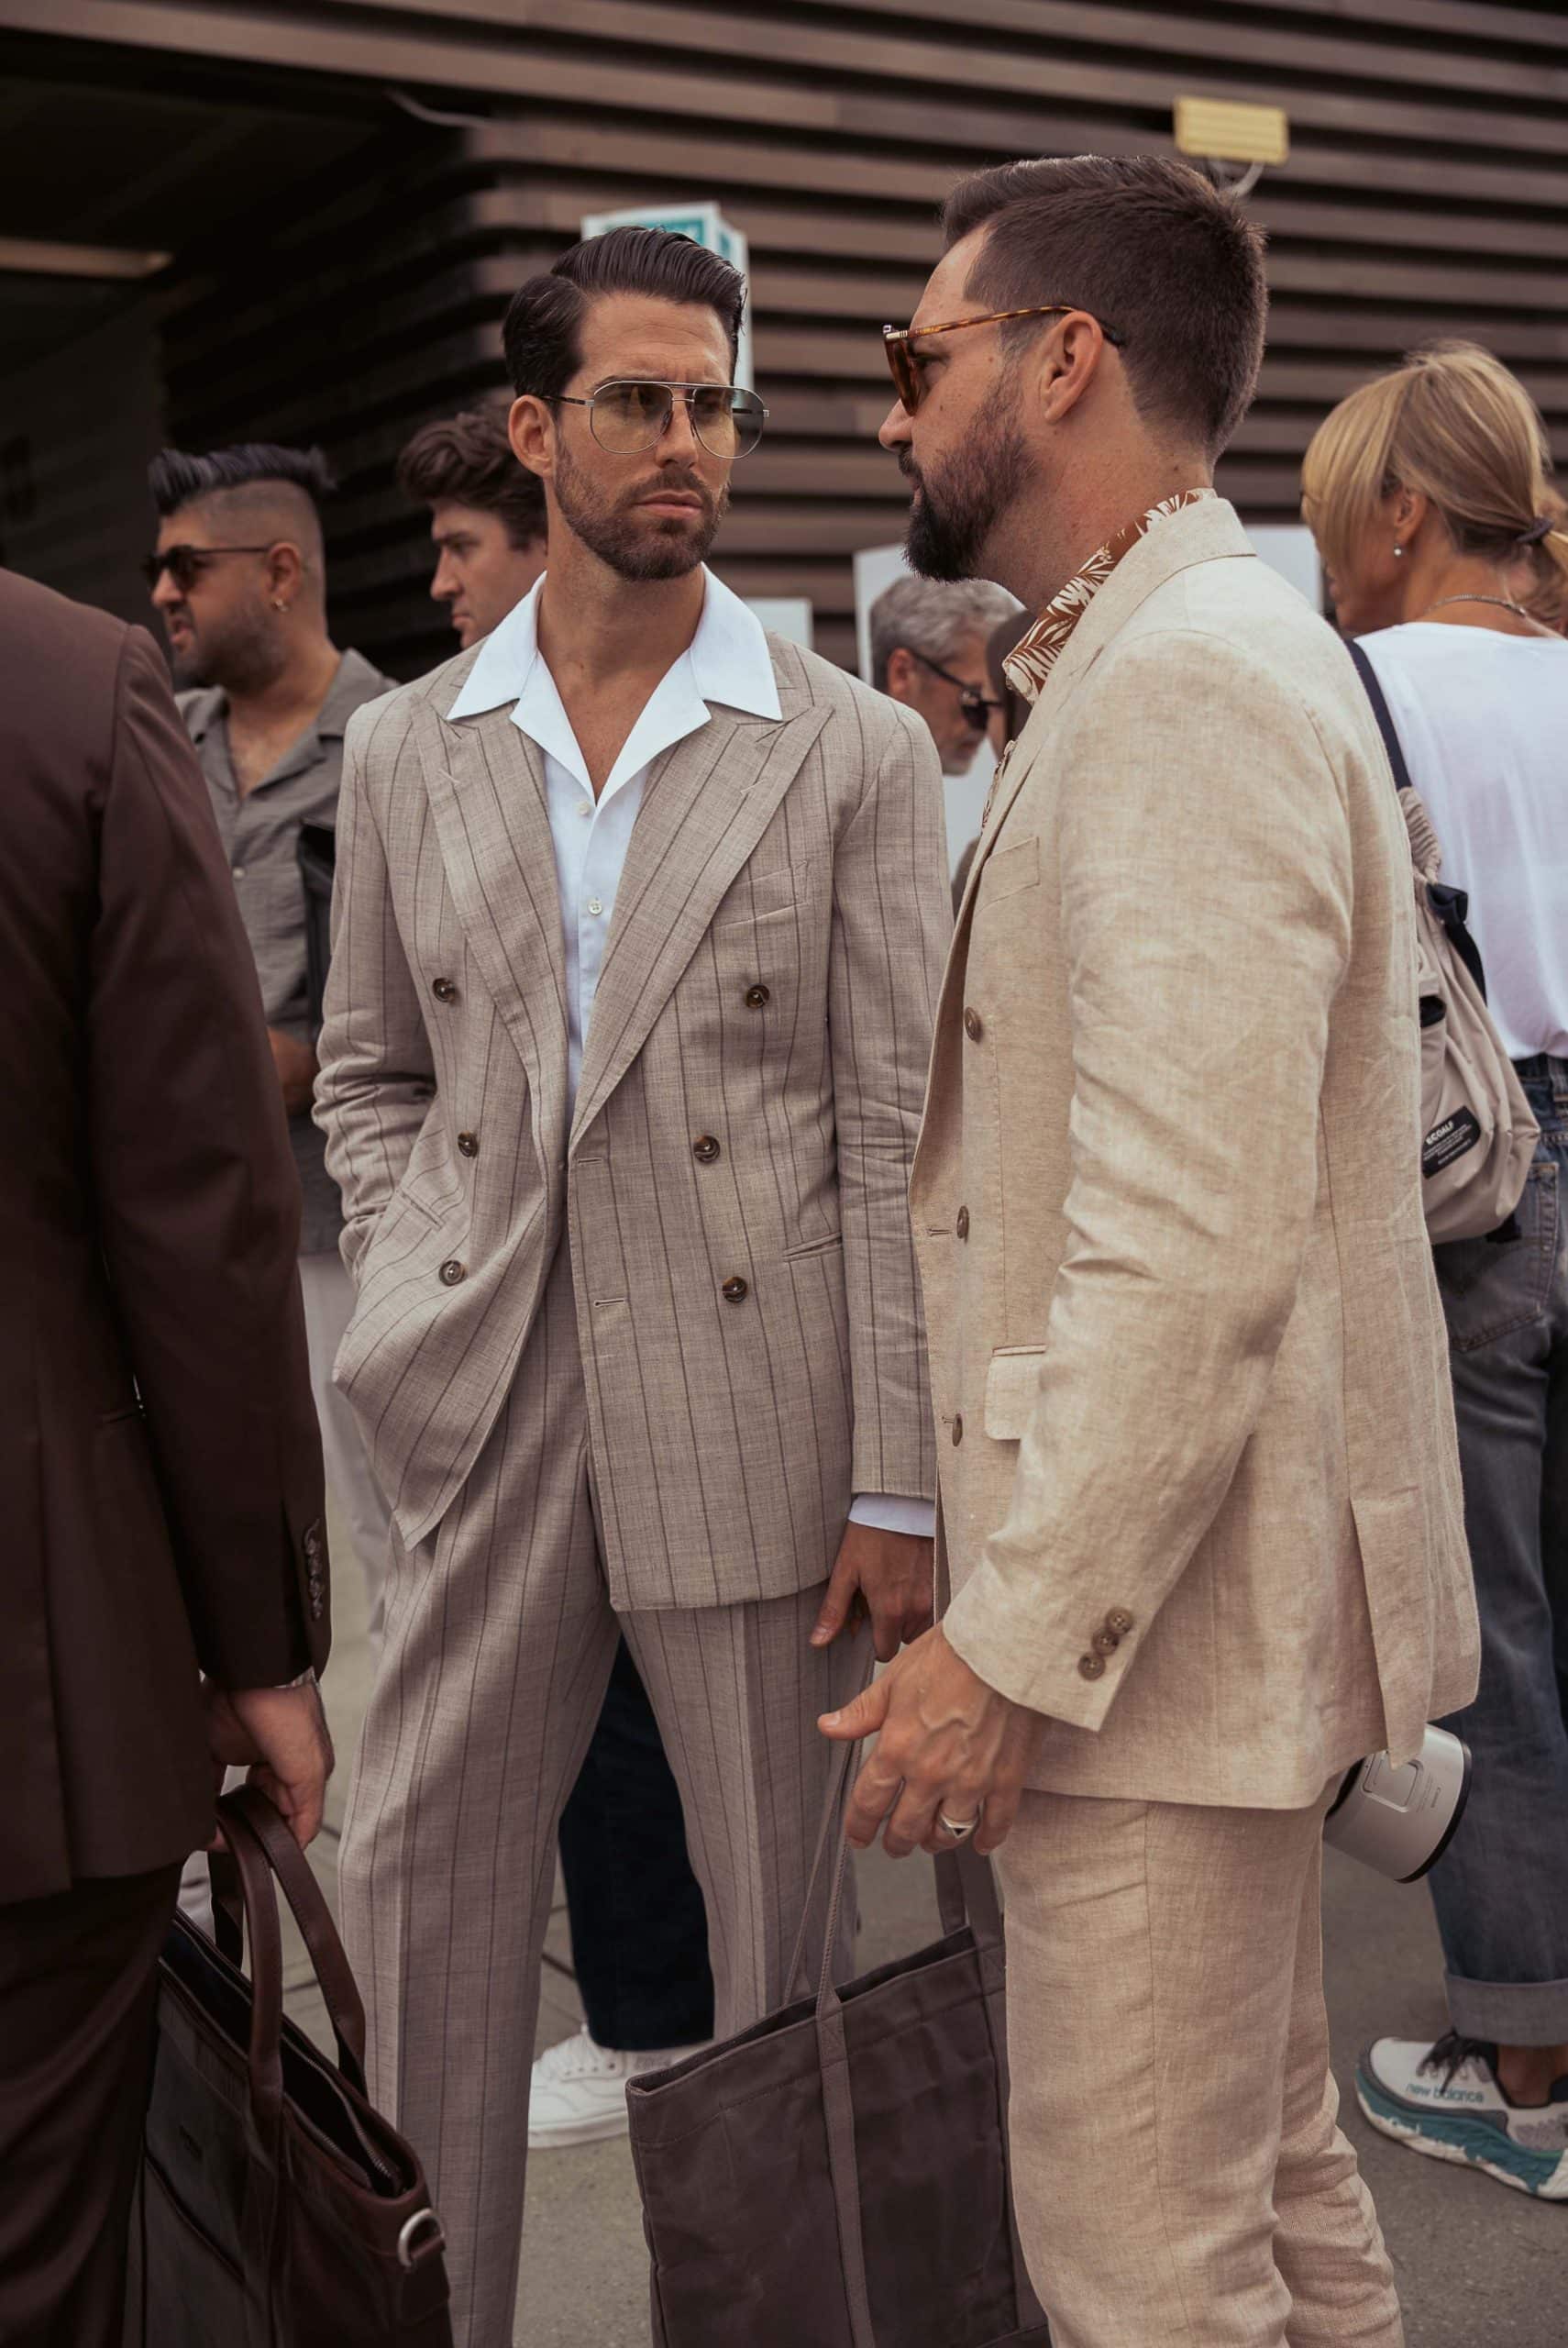 carlos domord wearing a striped suit by mond of copenhagen at pitti uomo 104